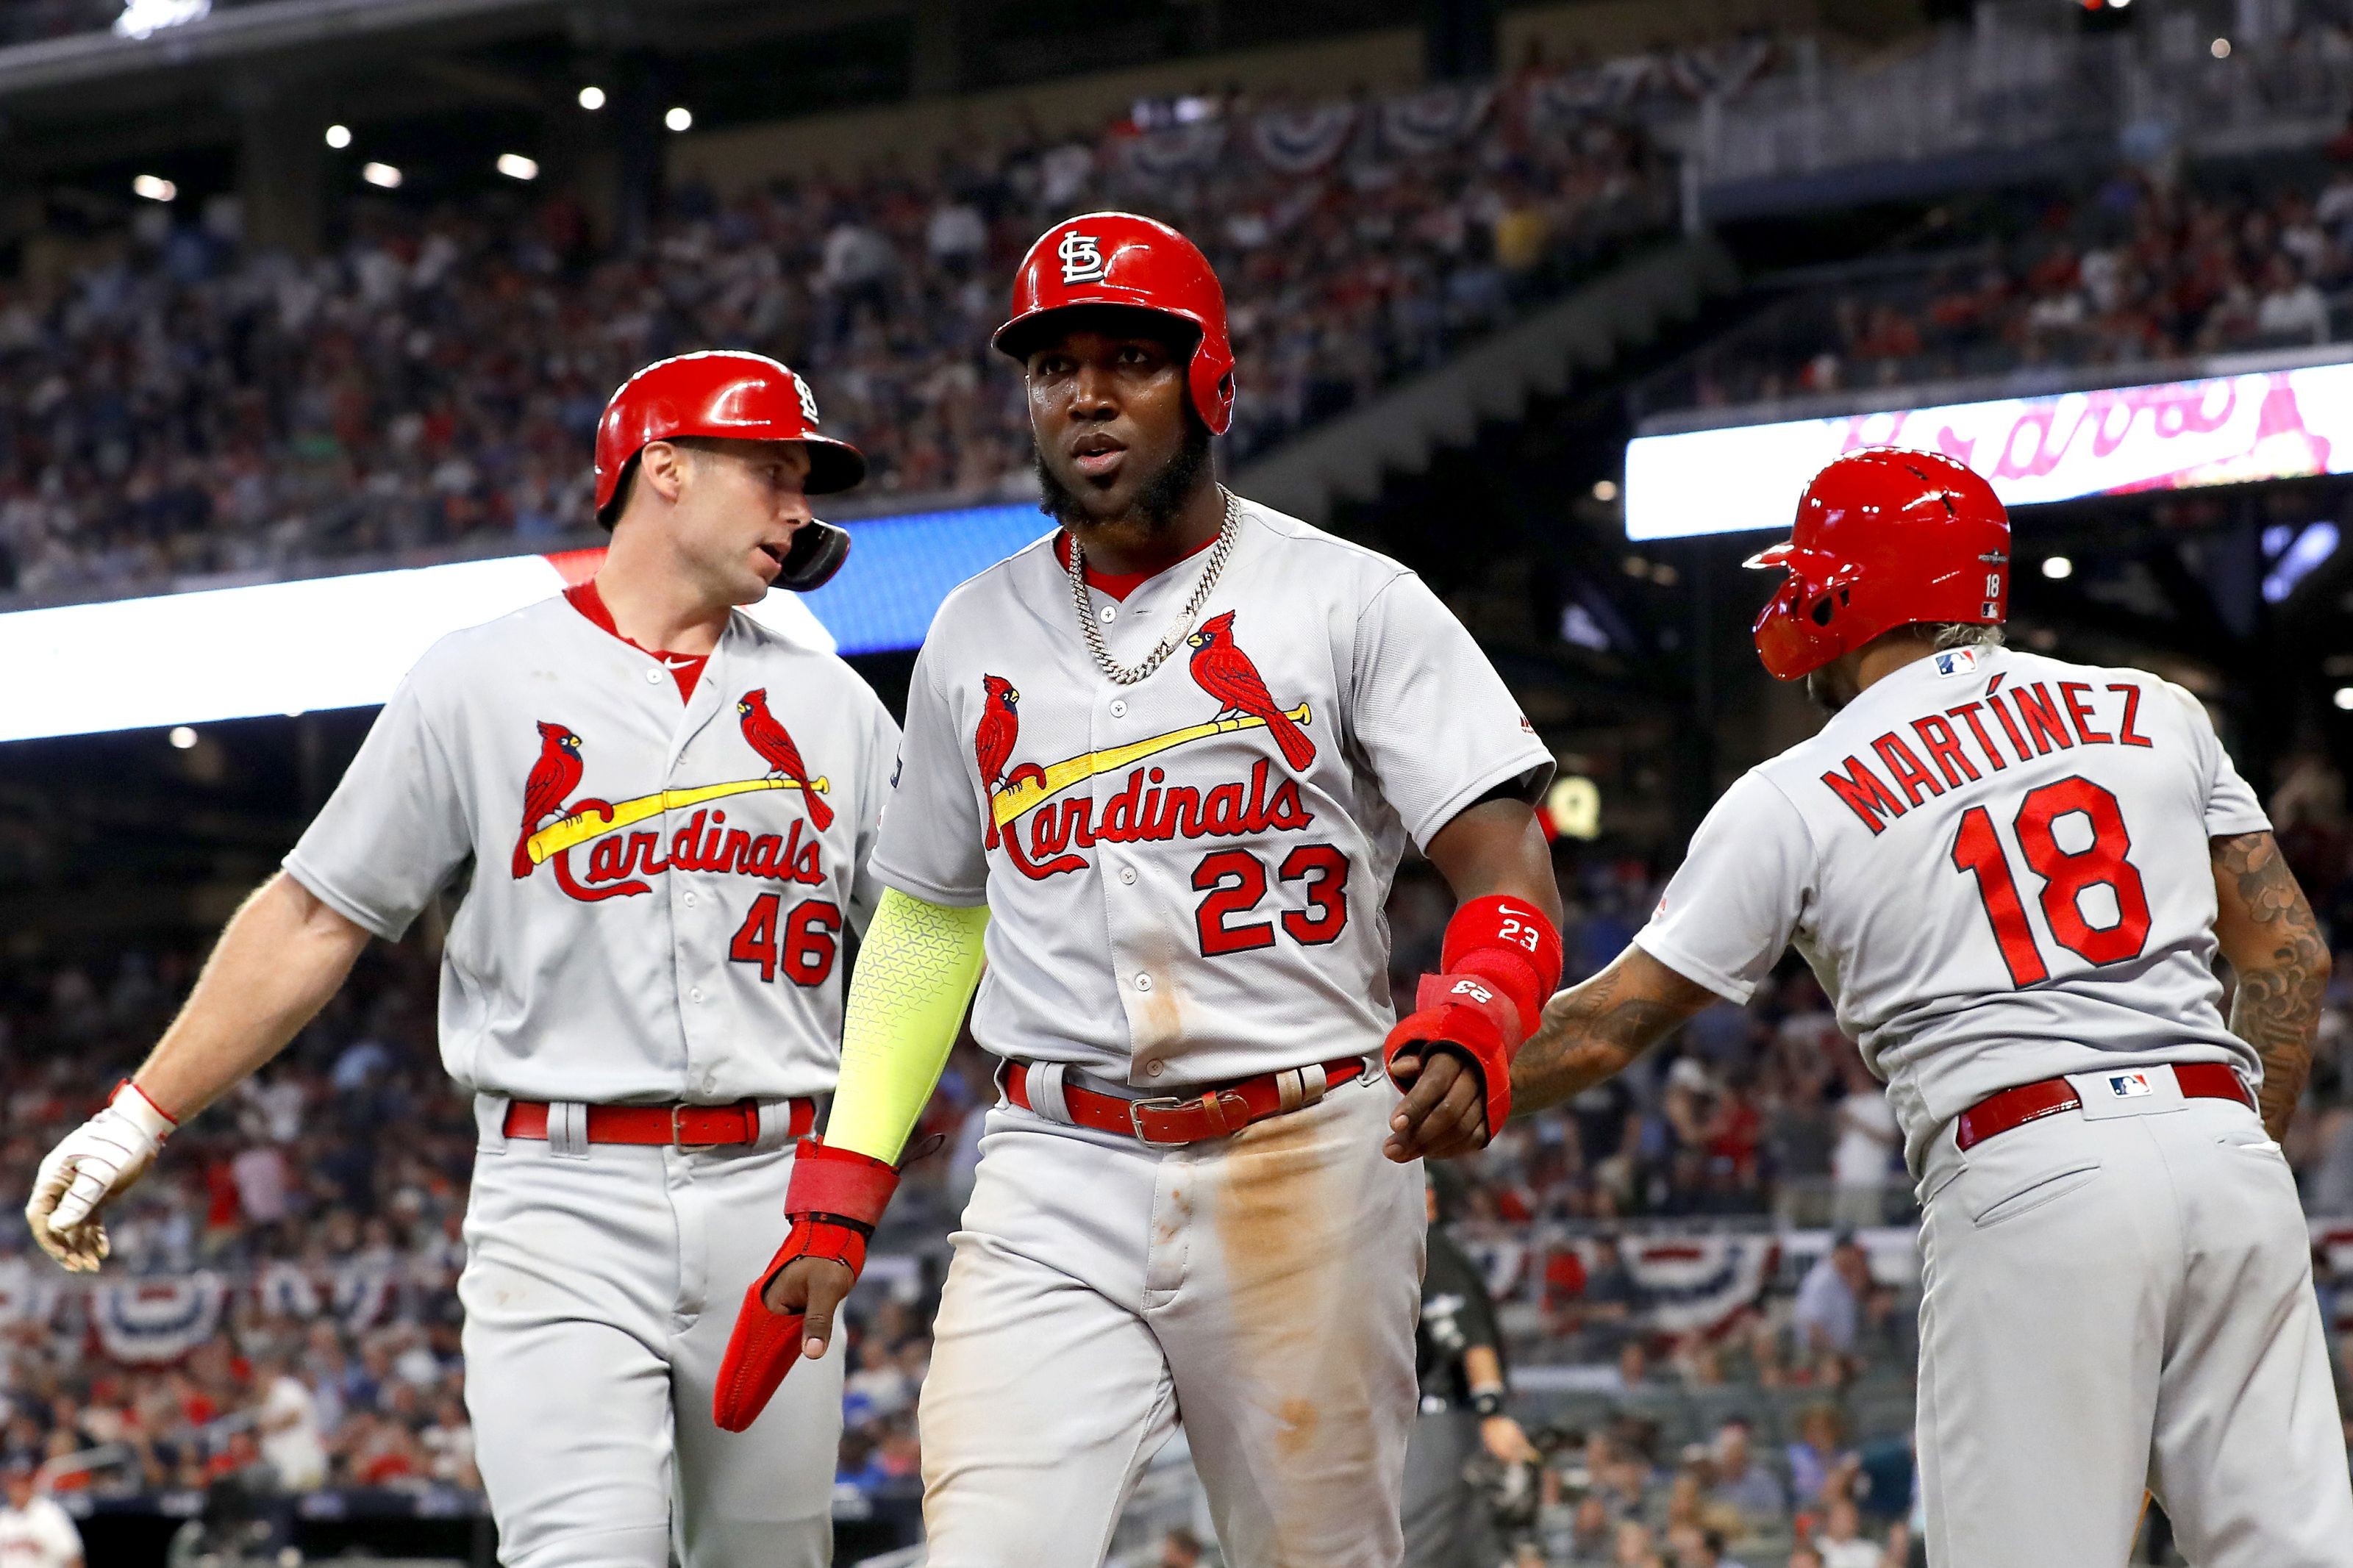 St. Louis Cardinals: The big bats need to keep it up in the NLCS